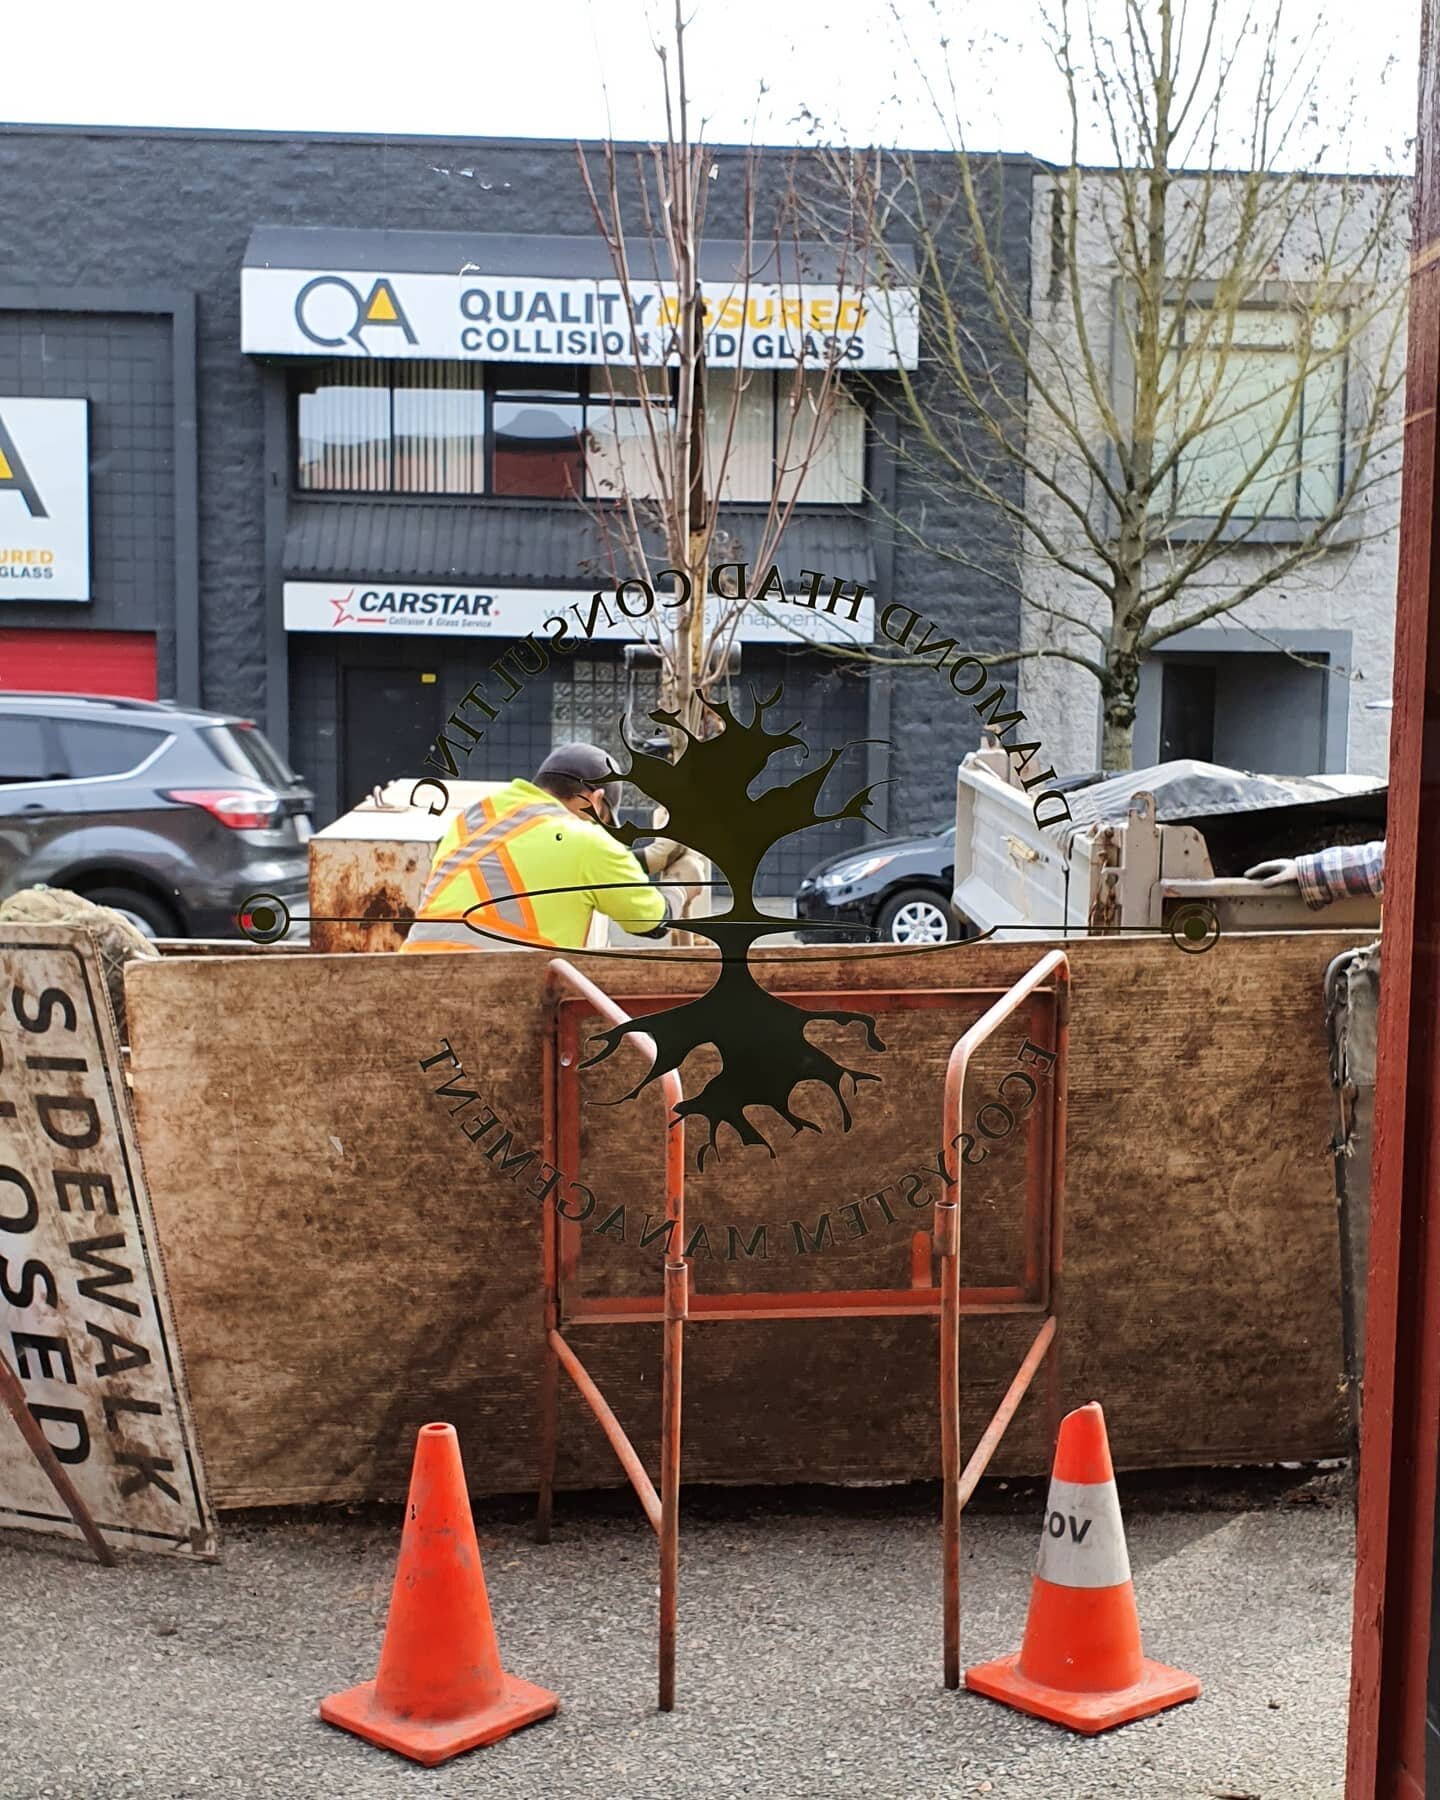 🌳 New Tree! 🌳
.
A Bowhall Red Maple was planted in front of our office in East Van this very morning!
.
#tree #vancouver #planting #sustainable #vancity #green #leaf #city #igdaily #urbanforestry #urban #new